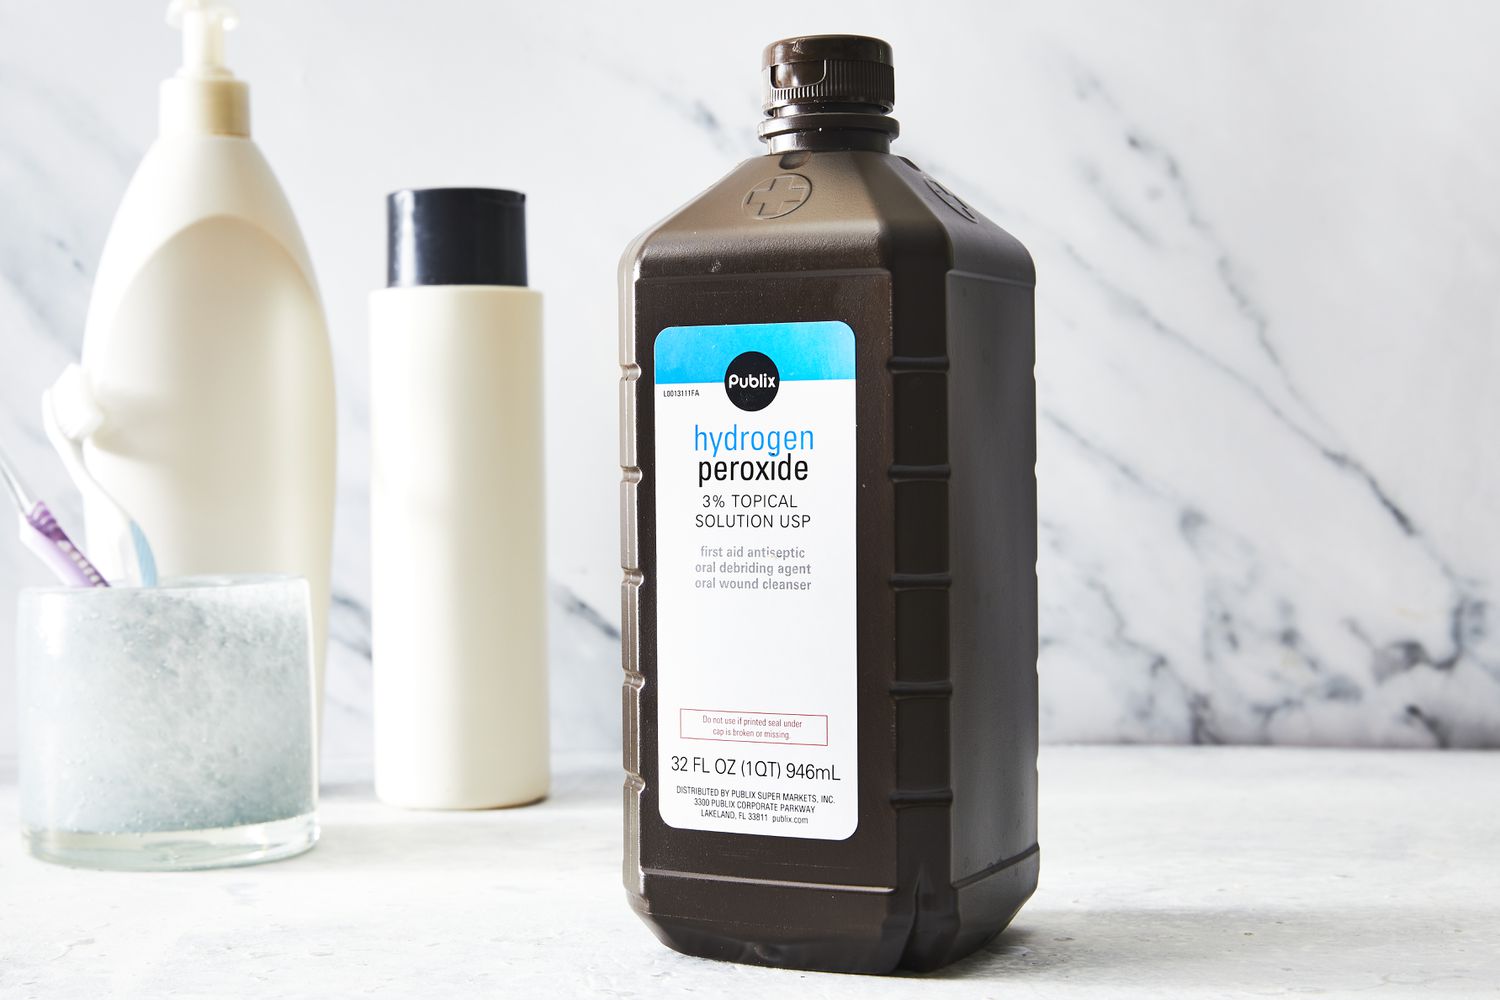 How To Store Hydrogen Peroxide At Home